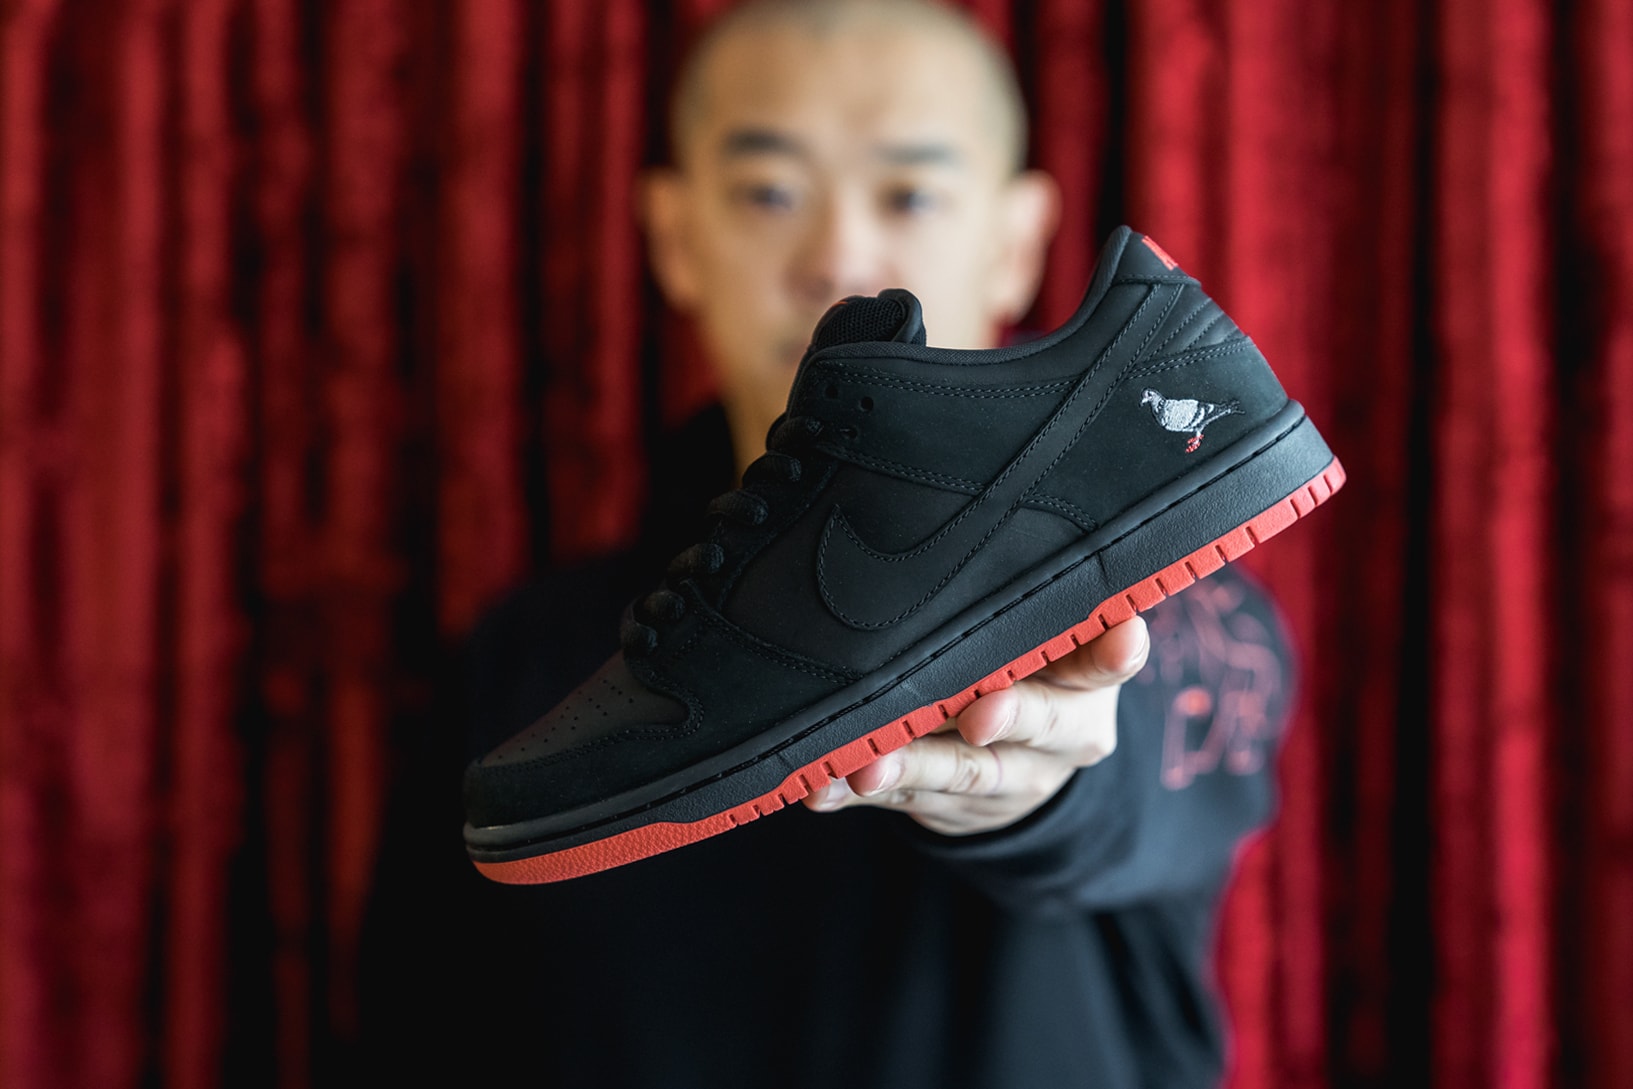 Jeff Staple Nike Dunk SB Low Black Pigeon Staple Design Reed Space Pop Up Extra Butter NYPD 2005 Riot Laser Etching LES Lower East Side Sneakers Release Info Date Drops November 7 11 SNRKS App